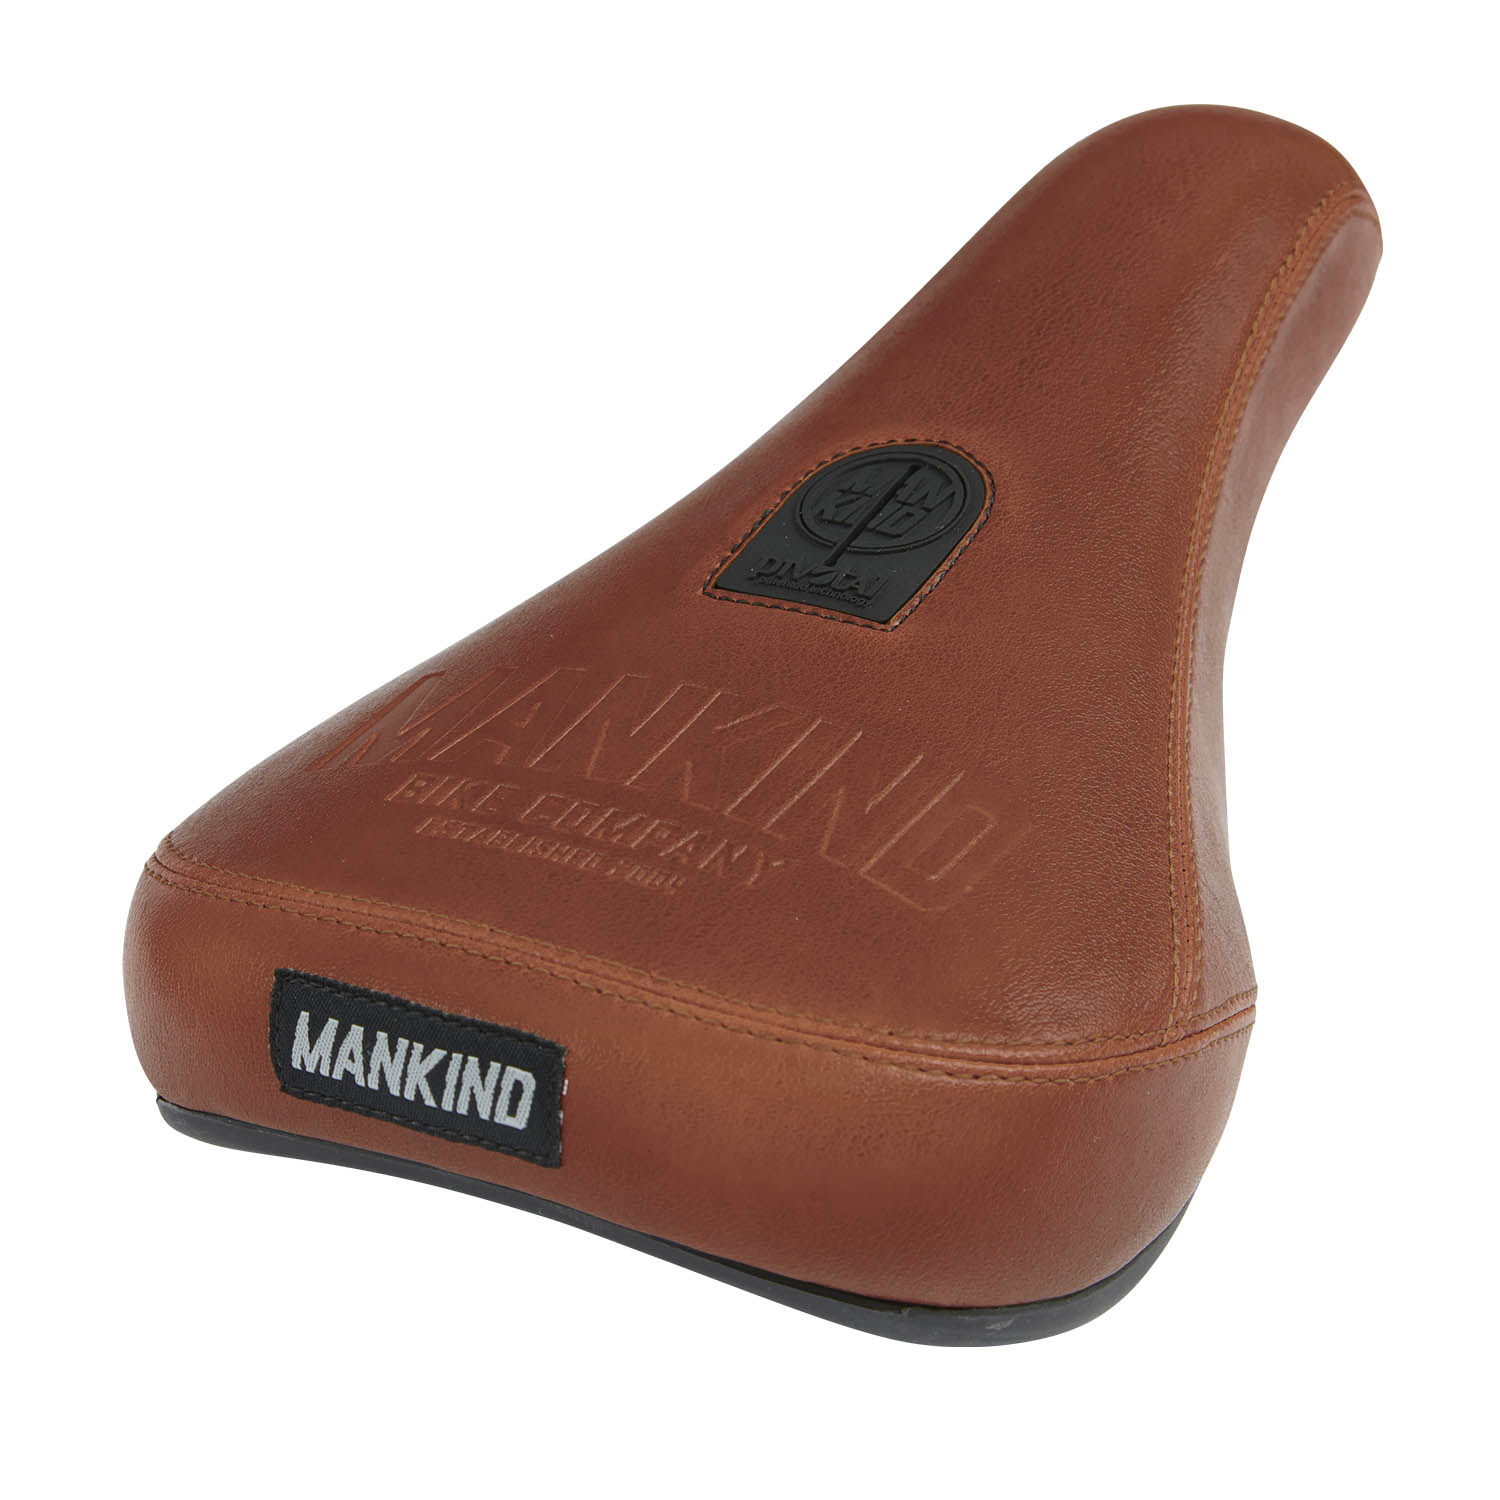 Mankind Sunchaser Pivotal Seat brown